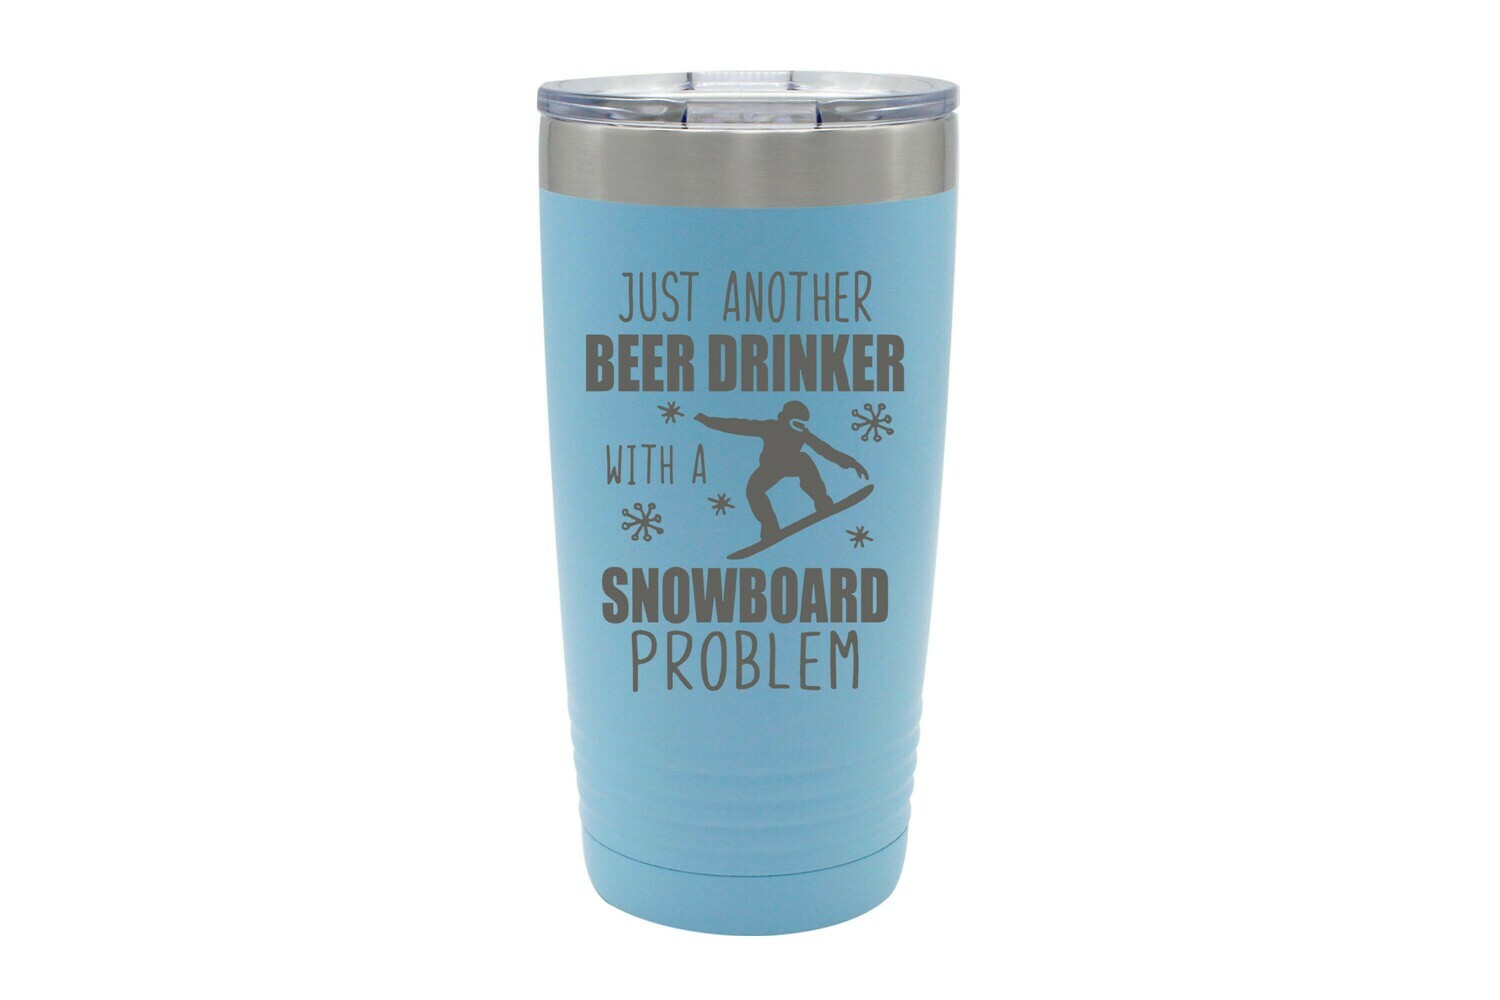 Just another Beer (or Your Choice) Drinker with a snowboard problem Insulated Tumbler 20 oz